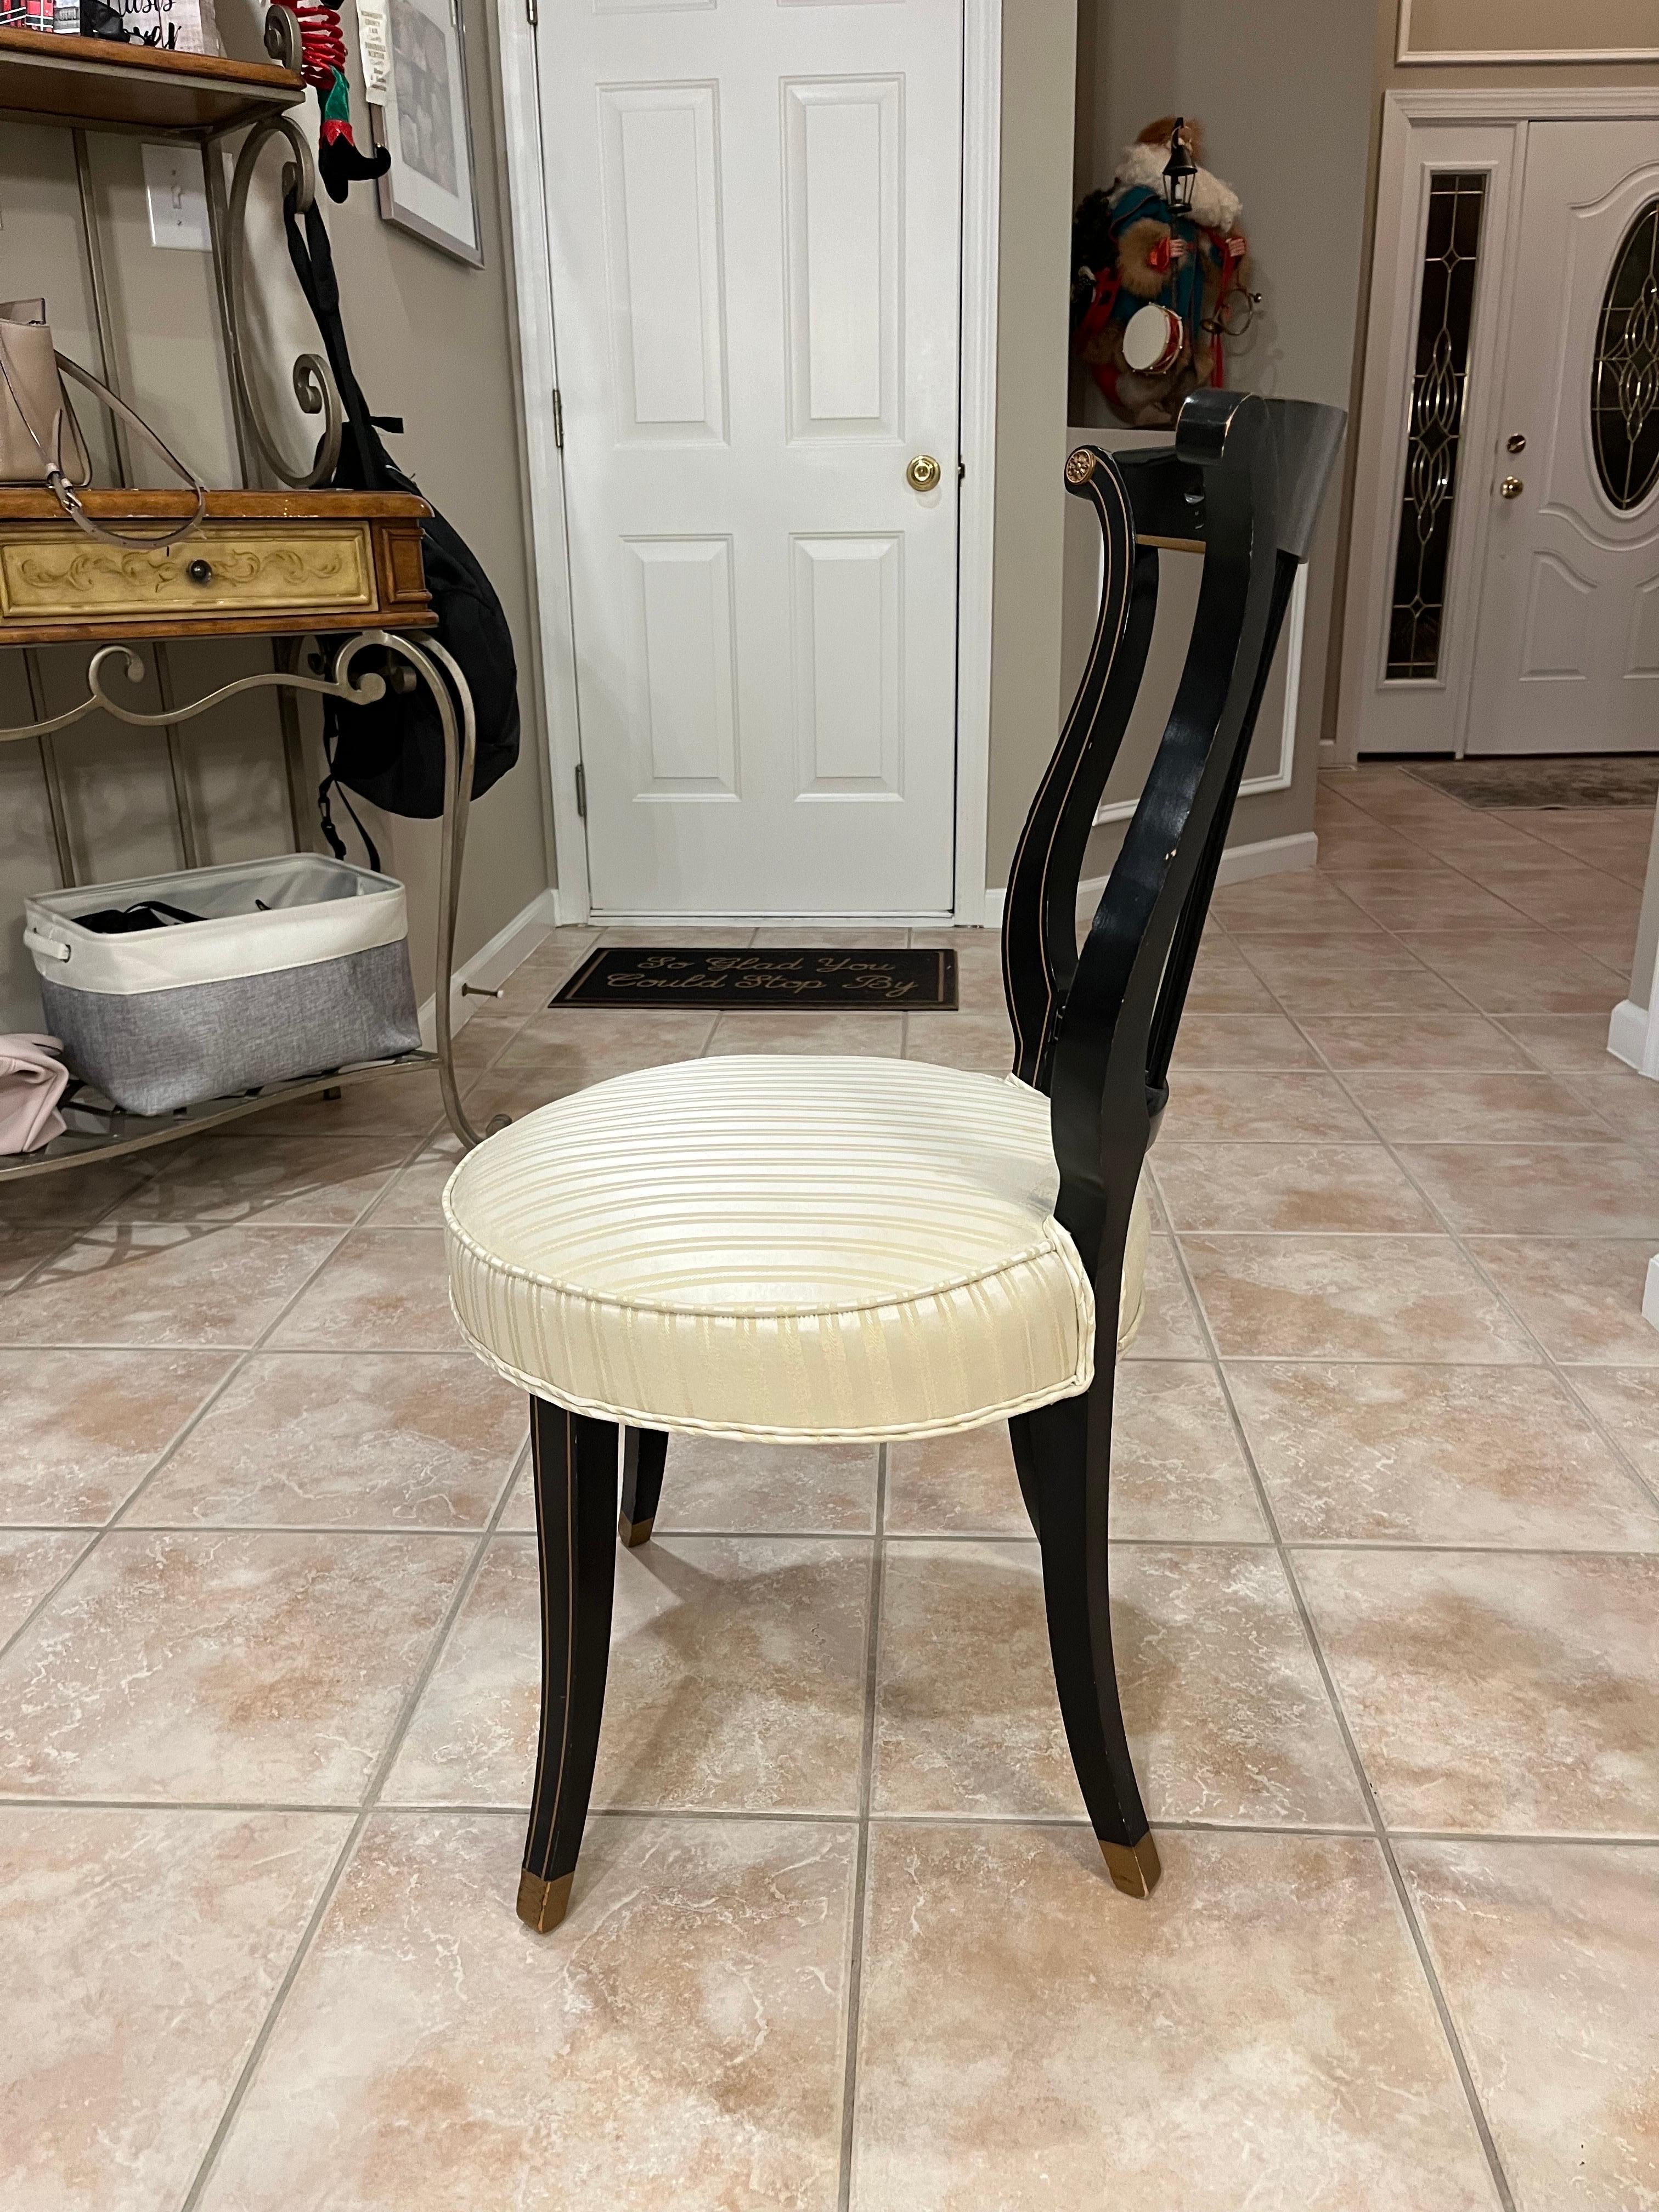 Beautiful survivor! Lyre Back side chair with subtle detailing across back support. Sleek sophisticated lines. Solid and sturdy.
Curbside to NYC/Philly $300